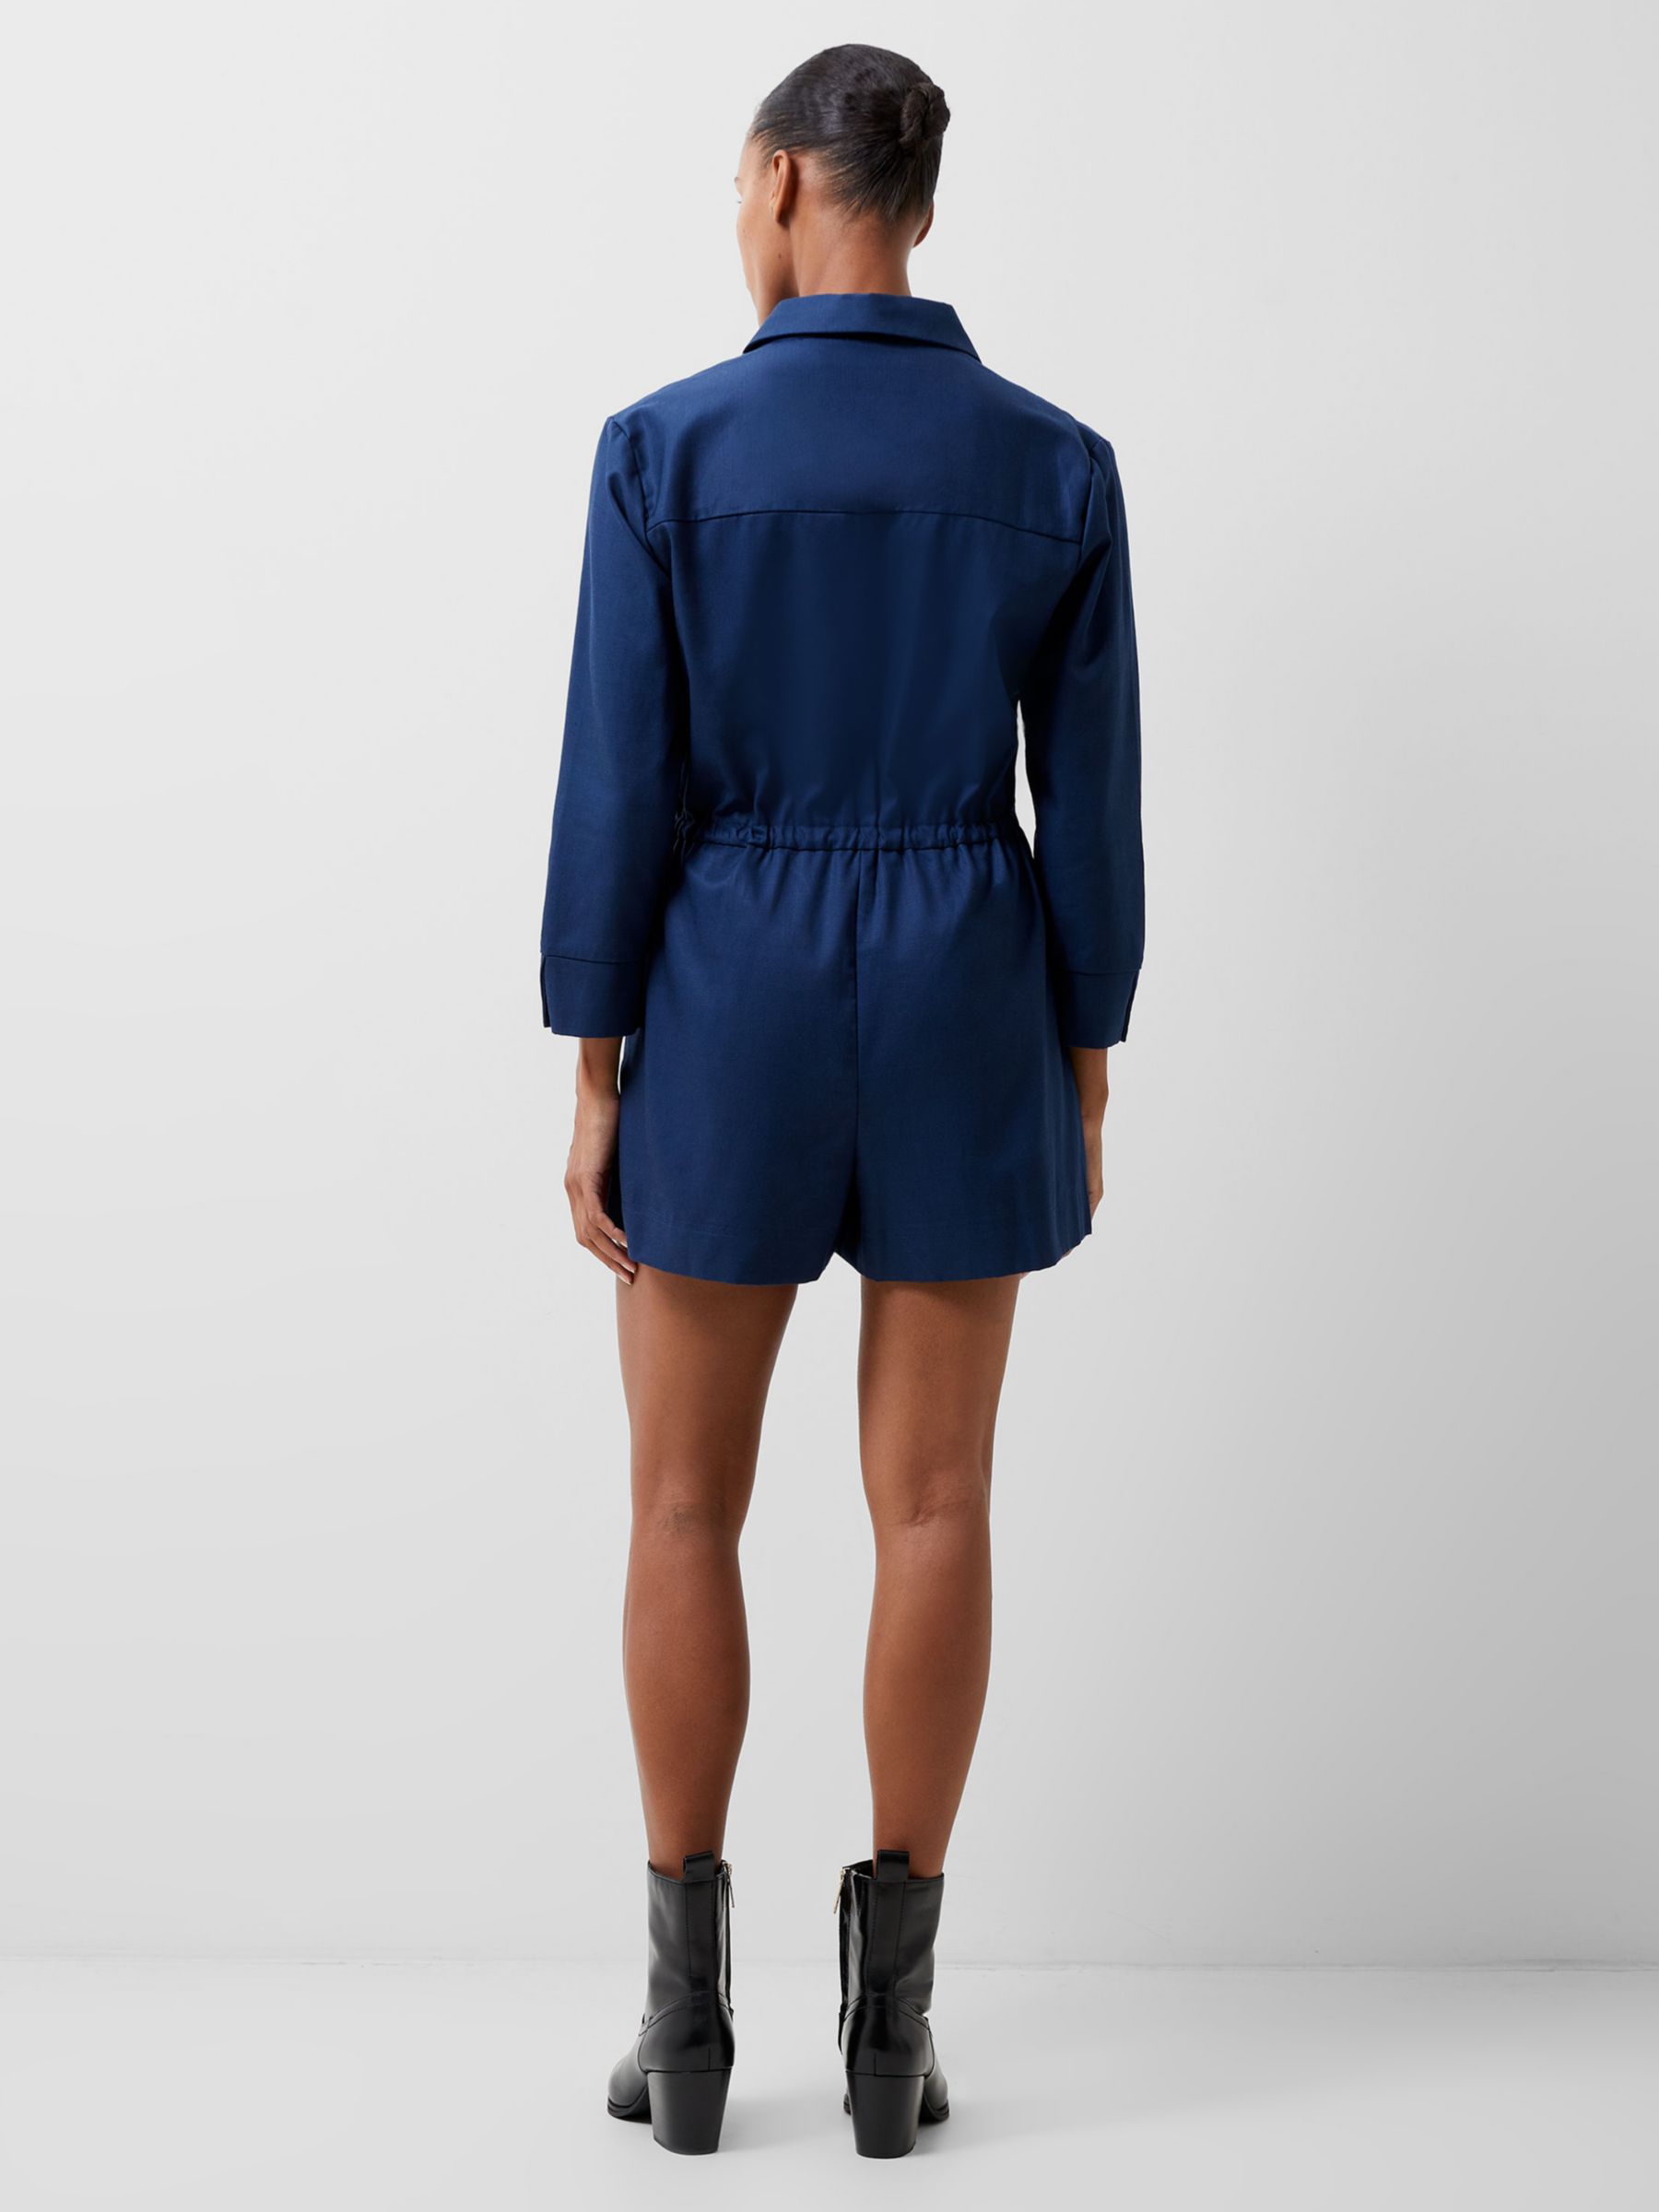 French Connection Bodie Shirt Playsuit, Midnight Blue, S